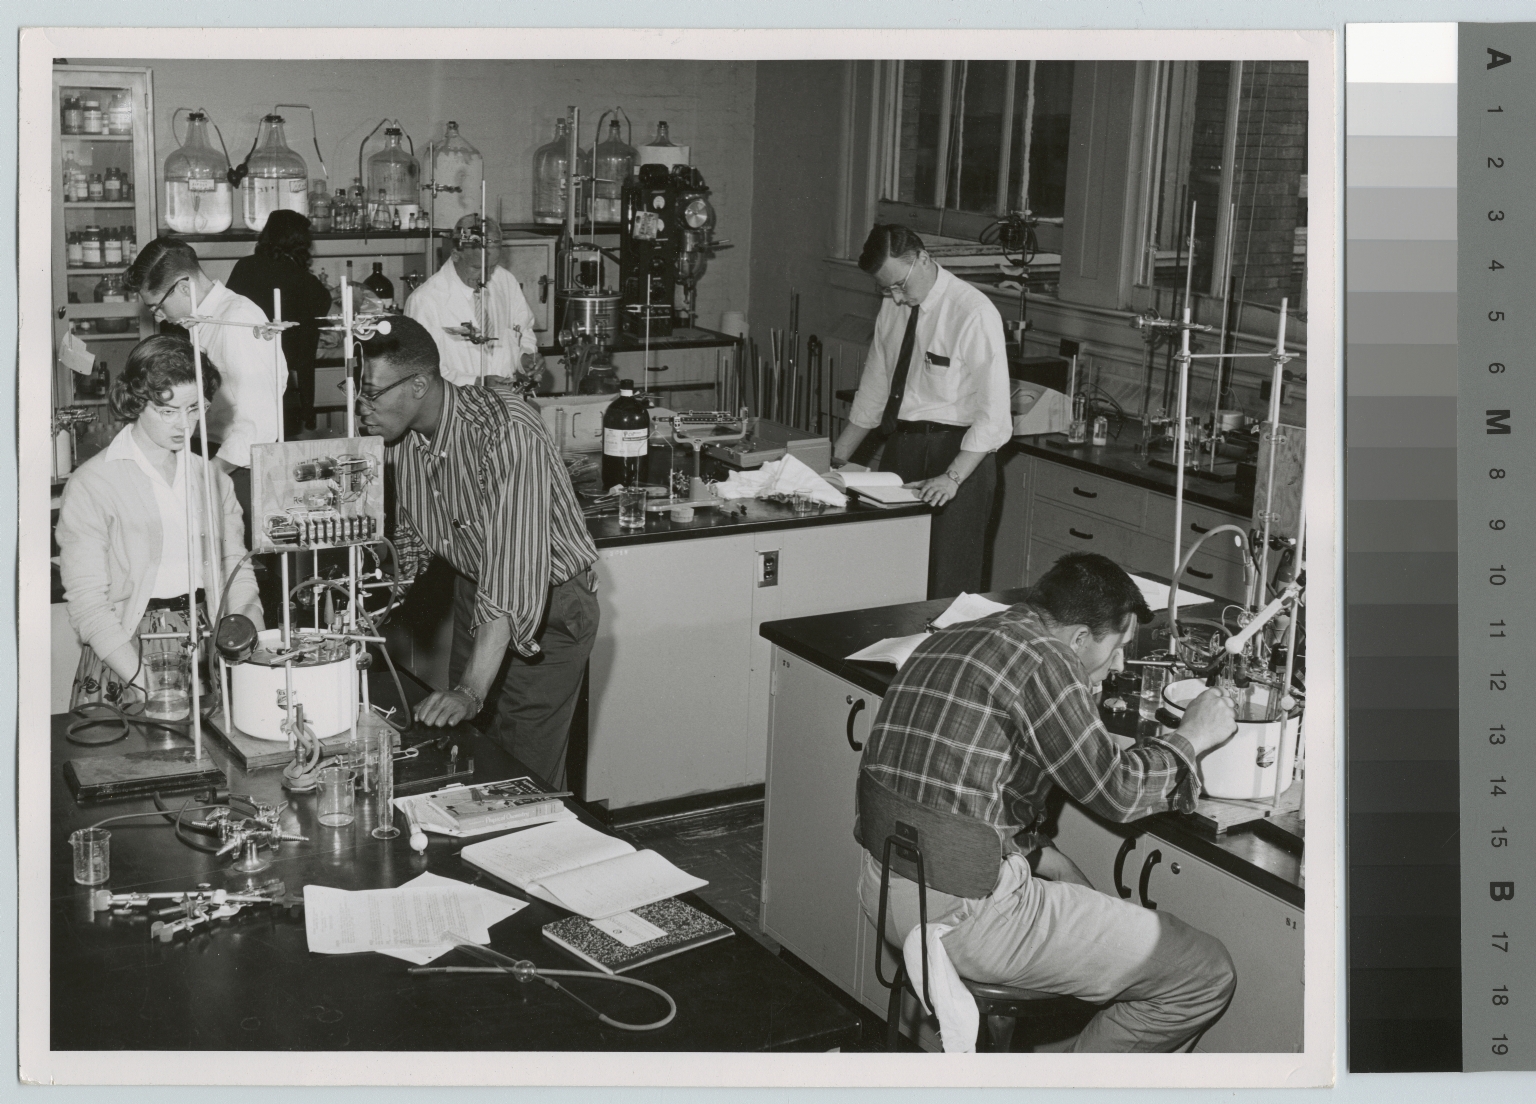 Academics, Chemistry, Rochester Institute of Technology students working on experiments in a chemistry lab, [1959-1962]